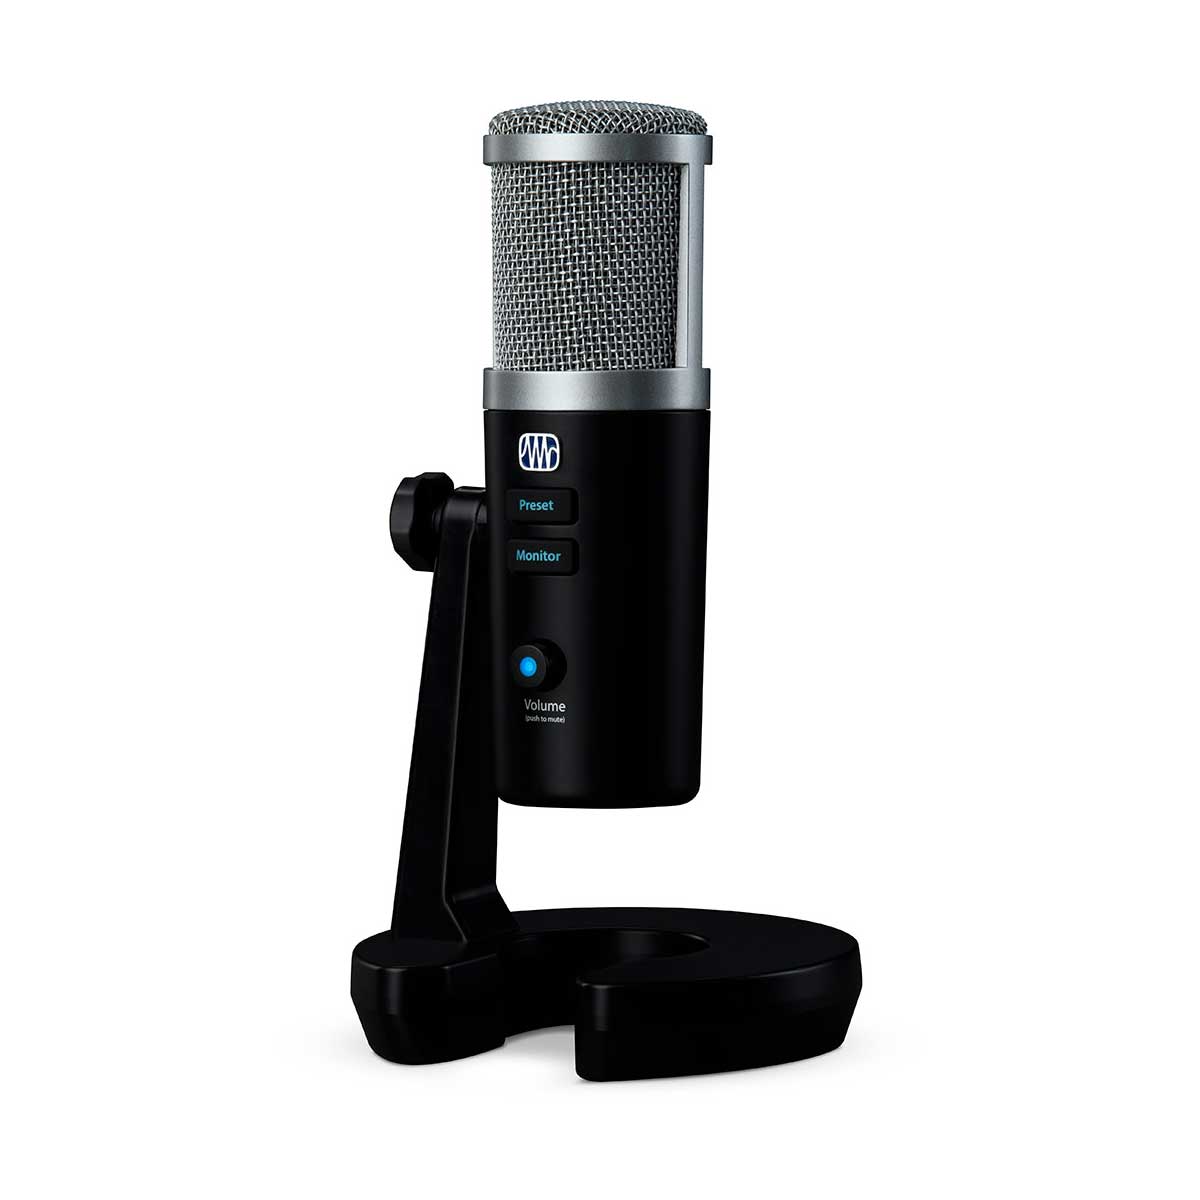 PreSonus Revelator Professional USB microphone for streaming, podcasting, gaming, and more.